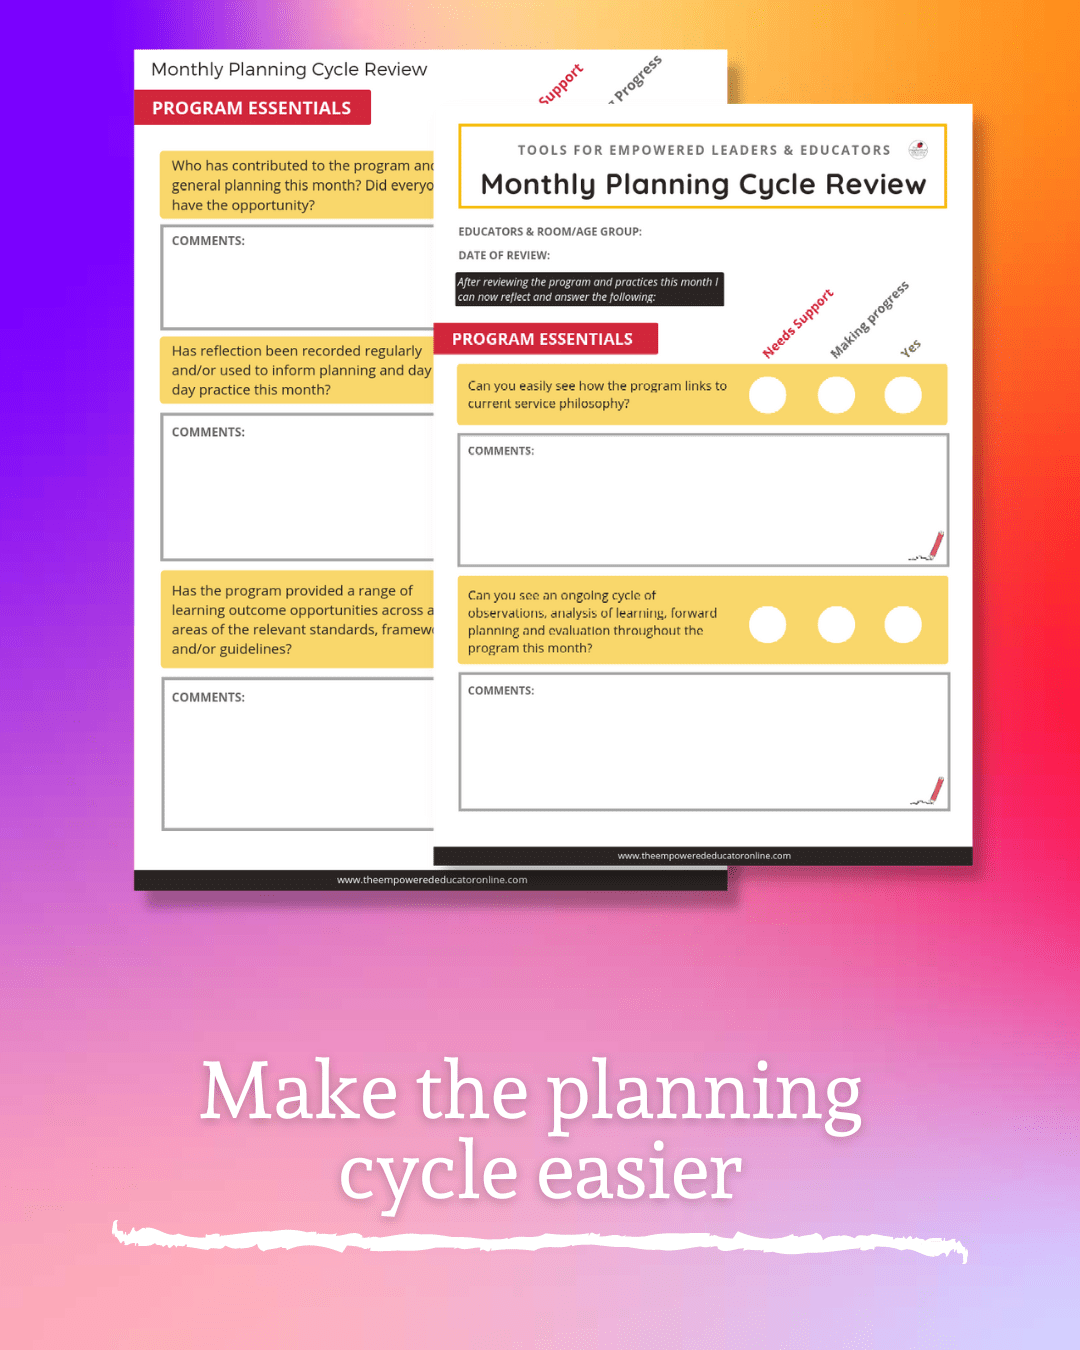 Make the planning cycle easier